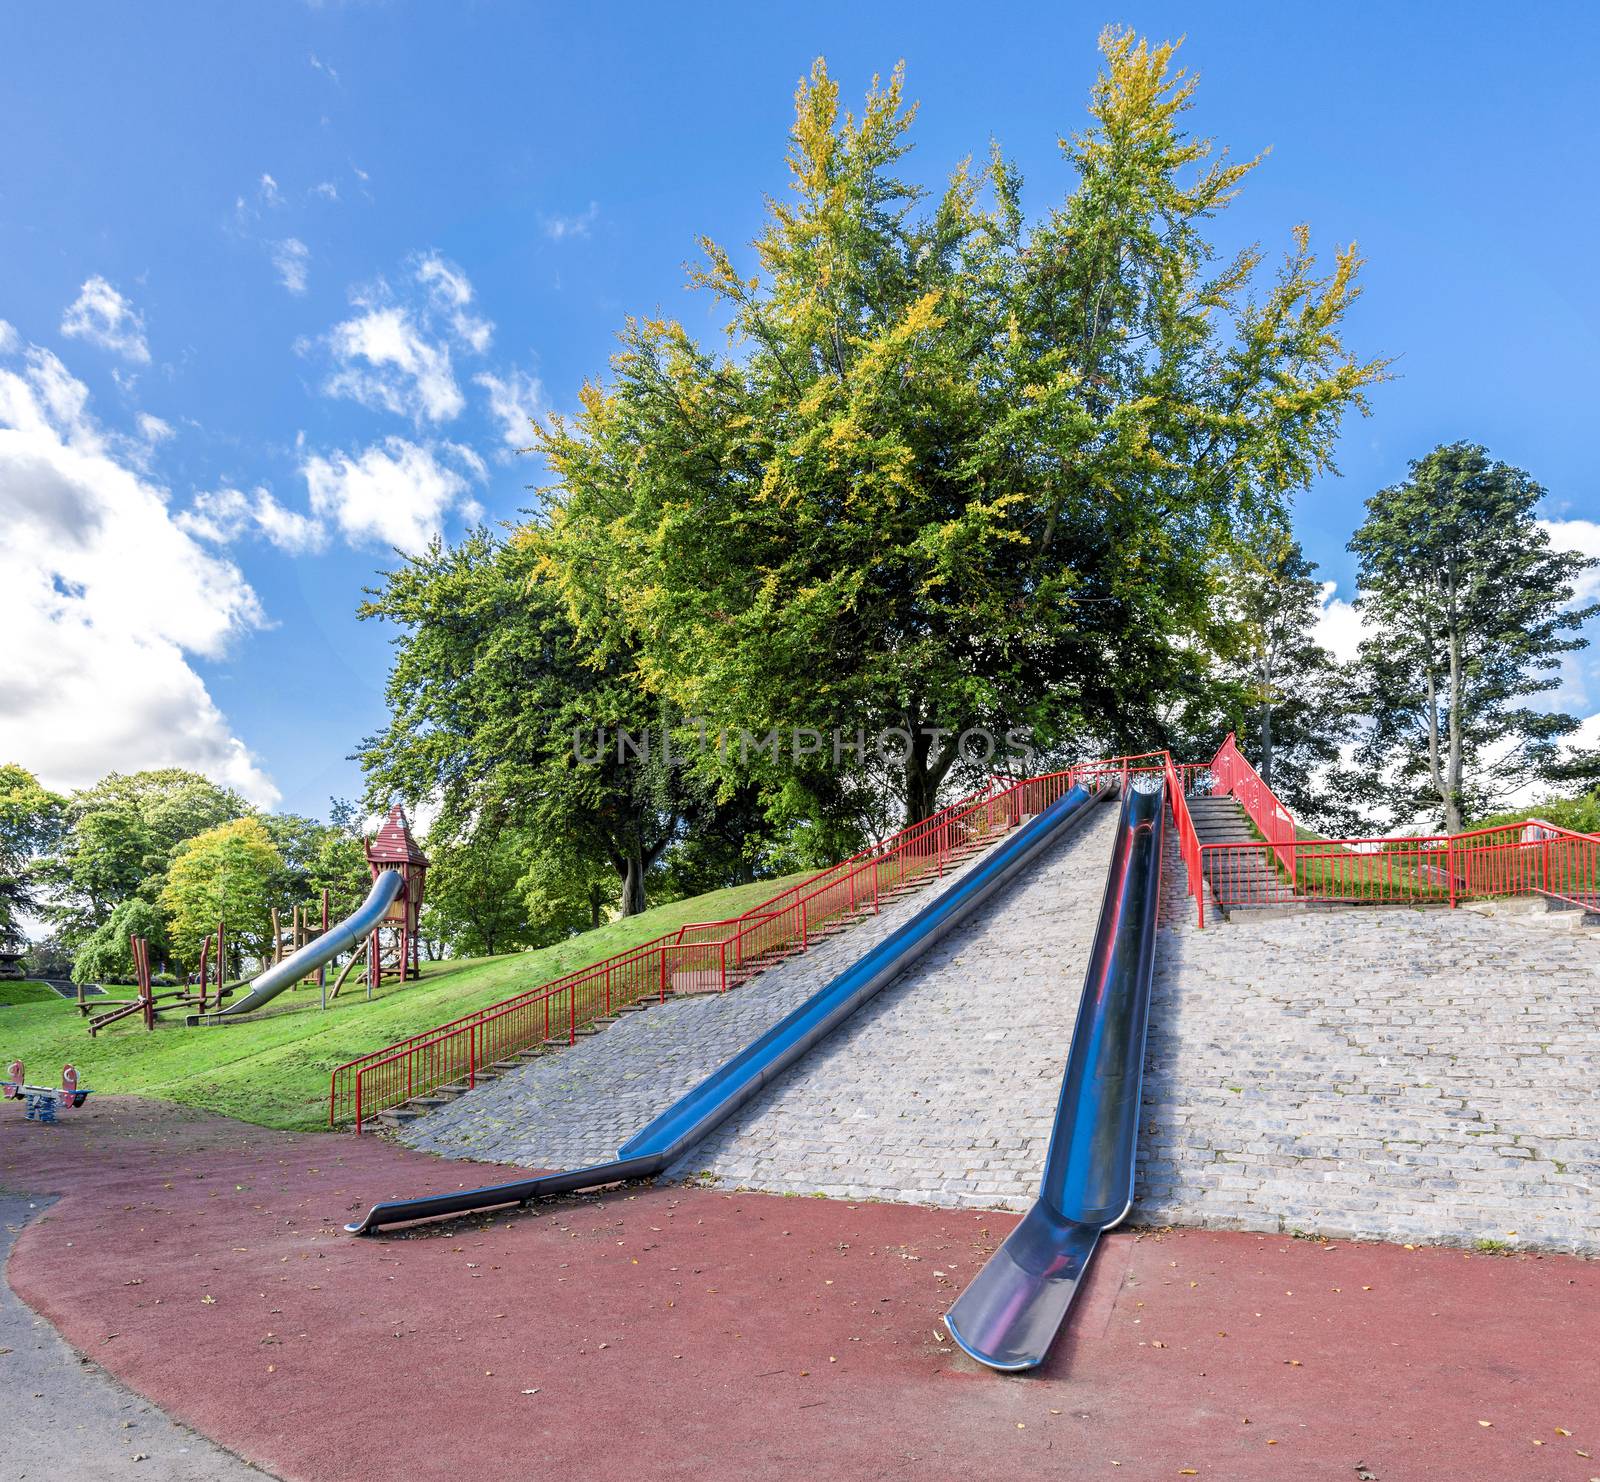 Large metal slides on top of a small hill at the entrance to Duthie Park, Aberdeen, Scotland